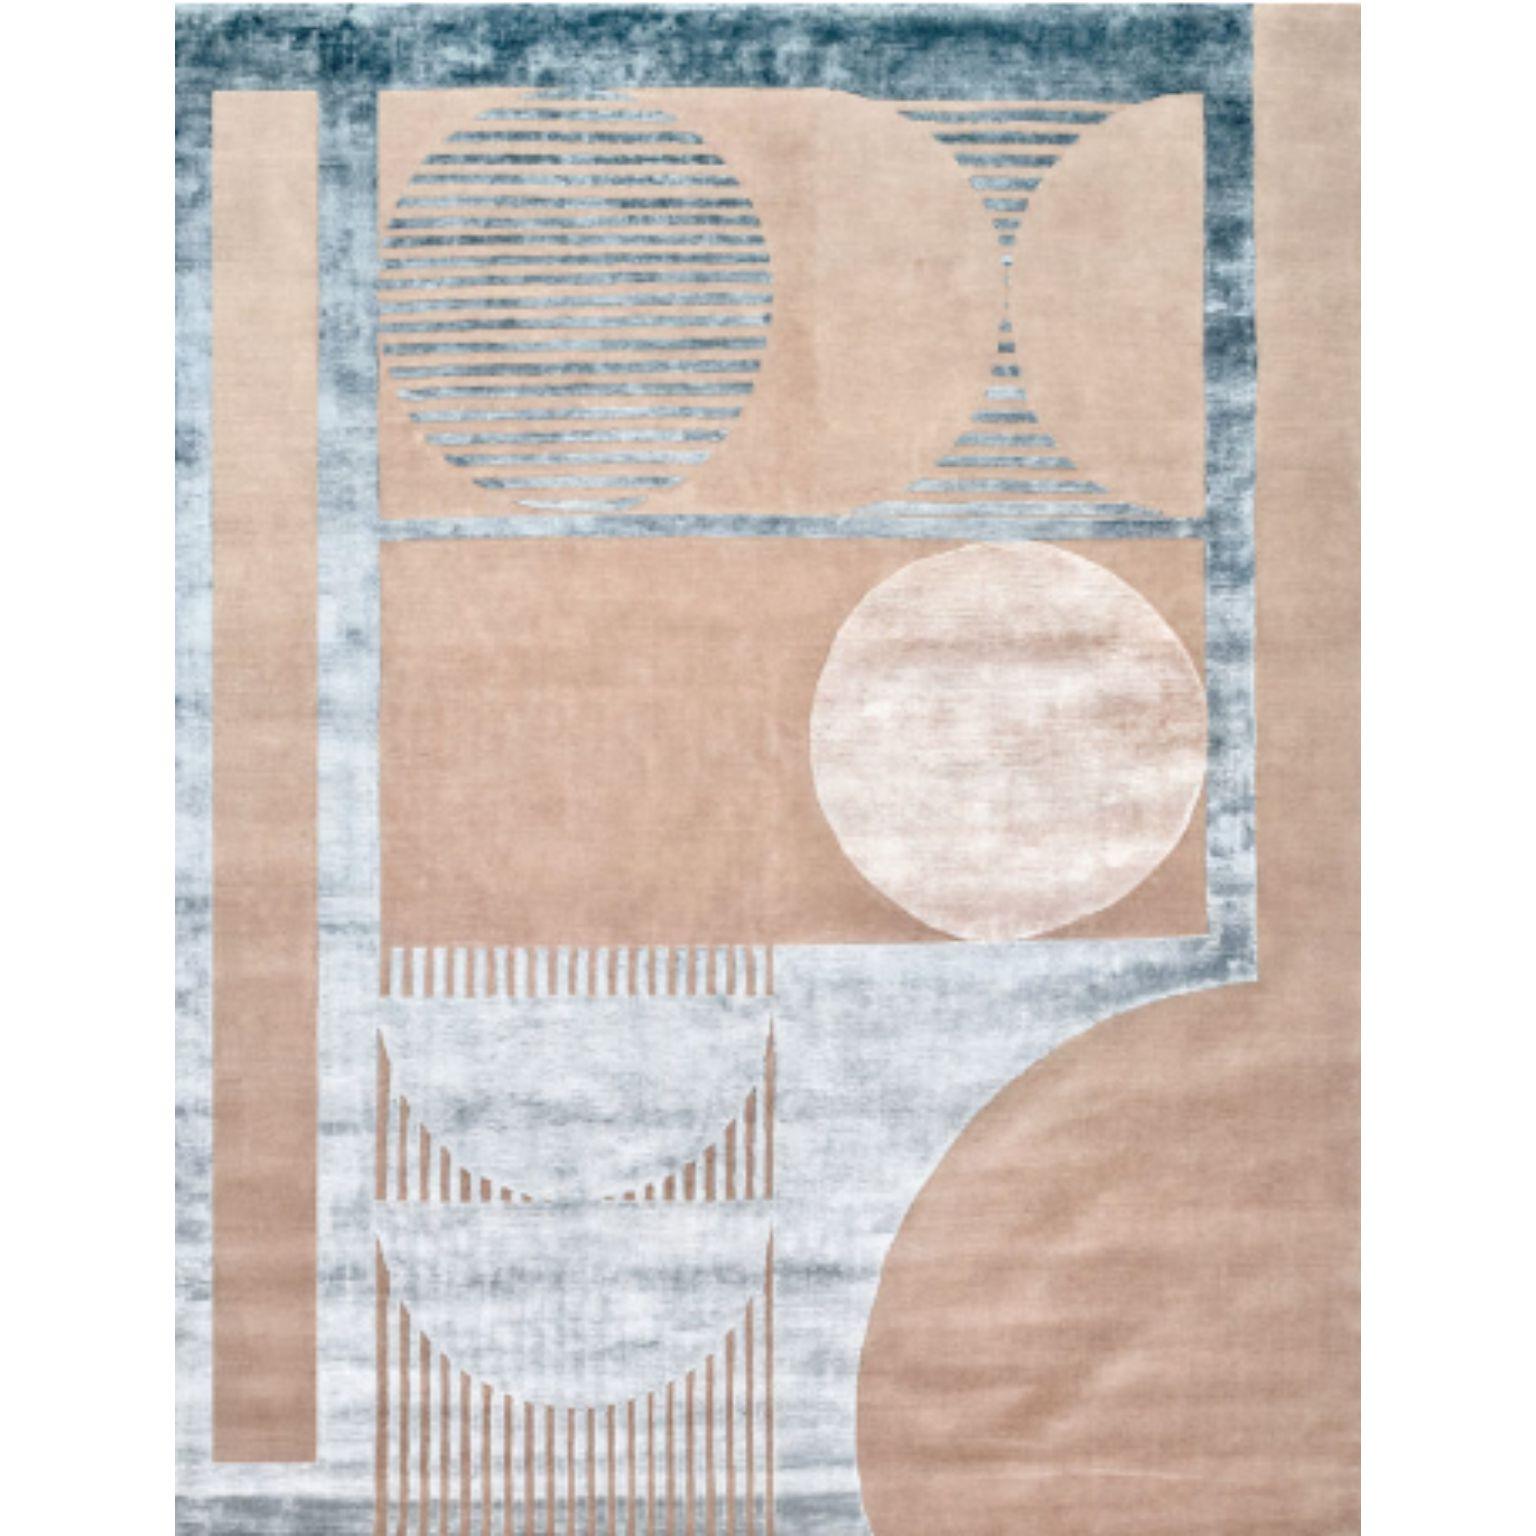 ECLIPSE 200 rug by Illulian
Dimensions: D 300 x H 200 cm 
Materials: Wool 50%, silk 50%
Variations available and prices may vary according to materials and sizes.

Illulian, historic and prestigious rug company brand, internationally renowned